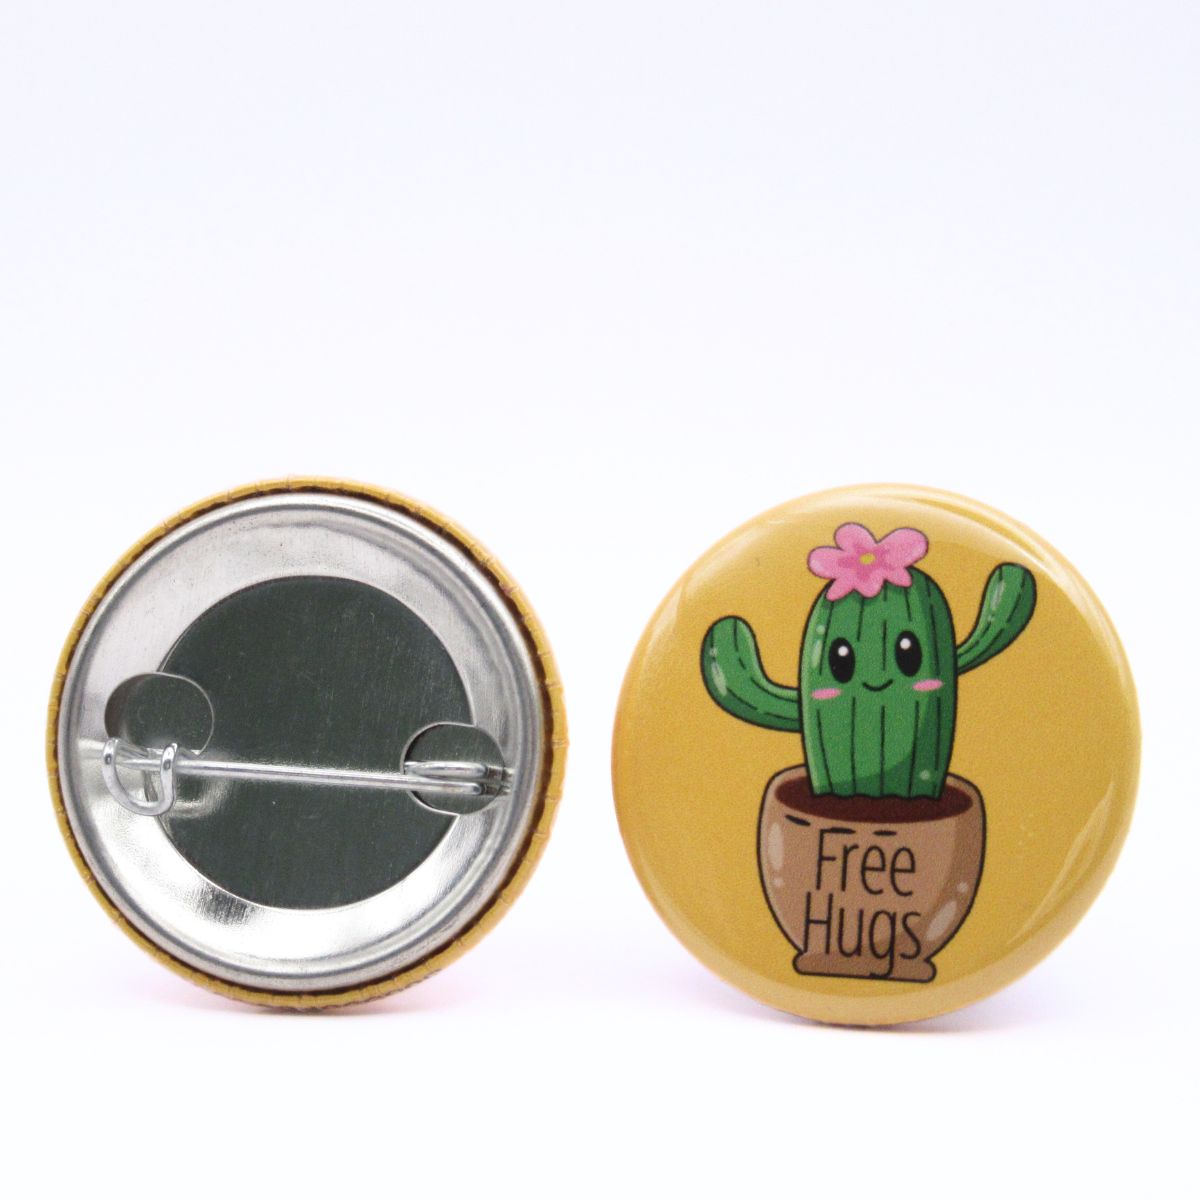 BooBooRoo Pinback Button (i.e. button, badge, pin) of a Cute Kawaii Style cactus offering free hugs. Image showing front and back of high-quality metal button.